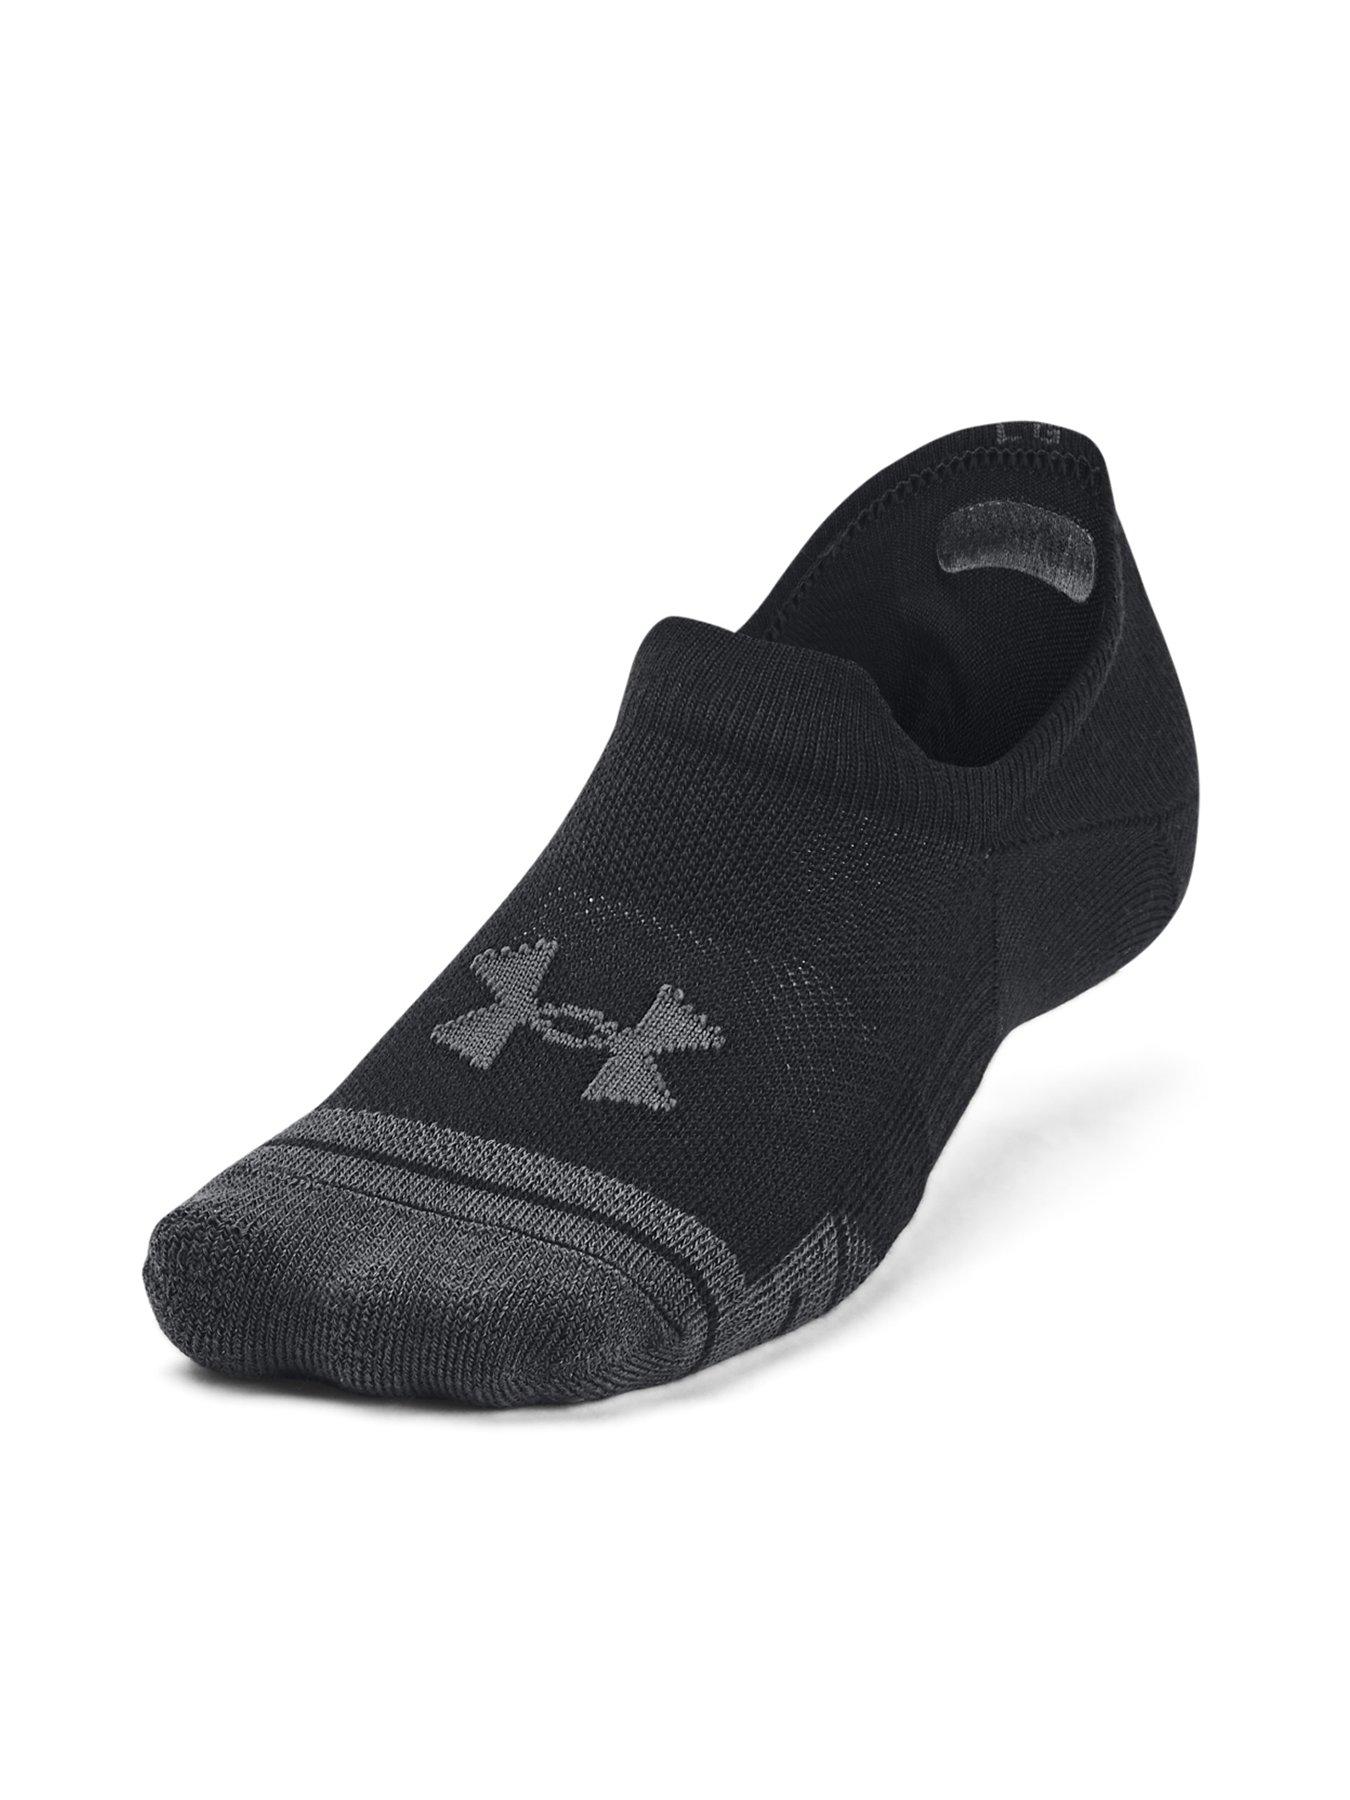 Calcetines UA Performance Tech 3-Pack Ultra Low Tab unisex